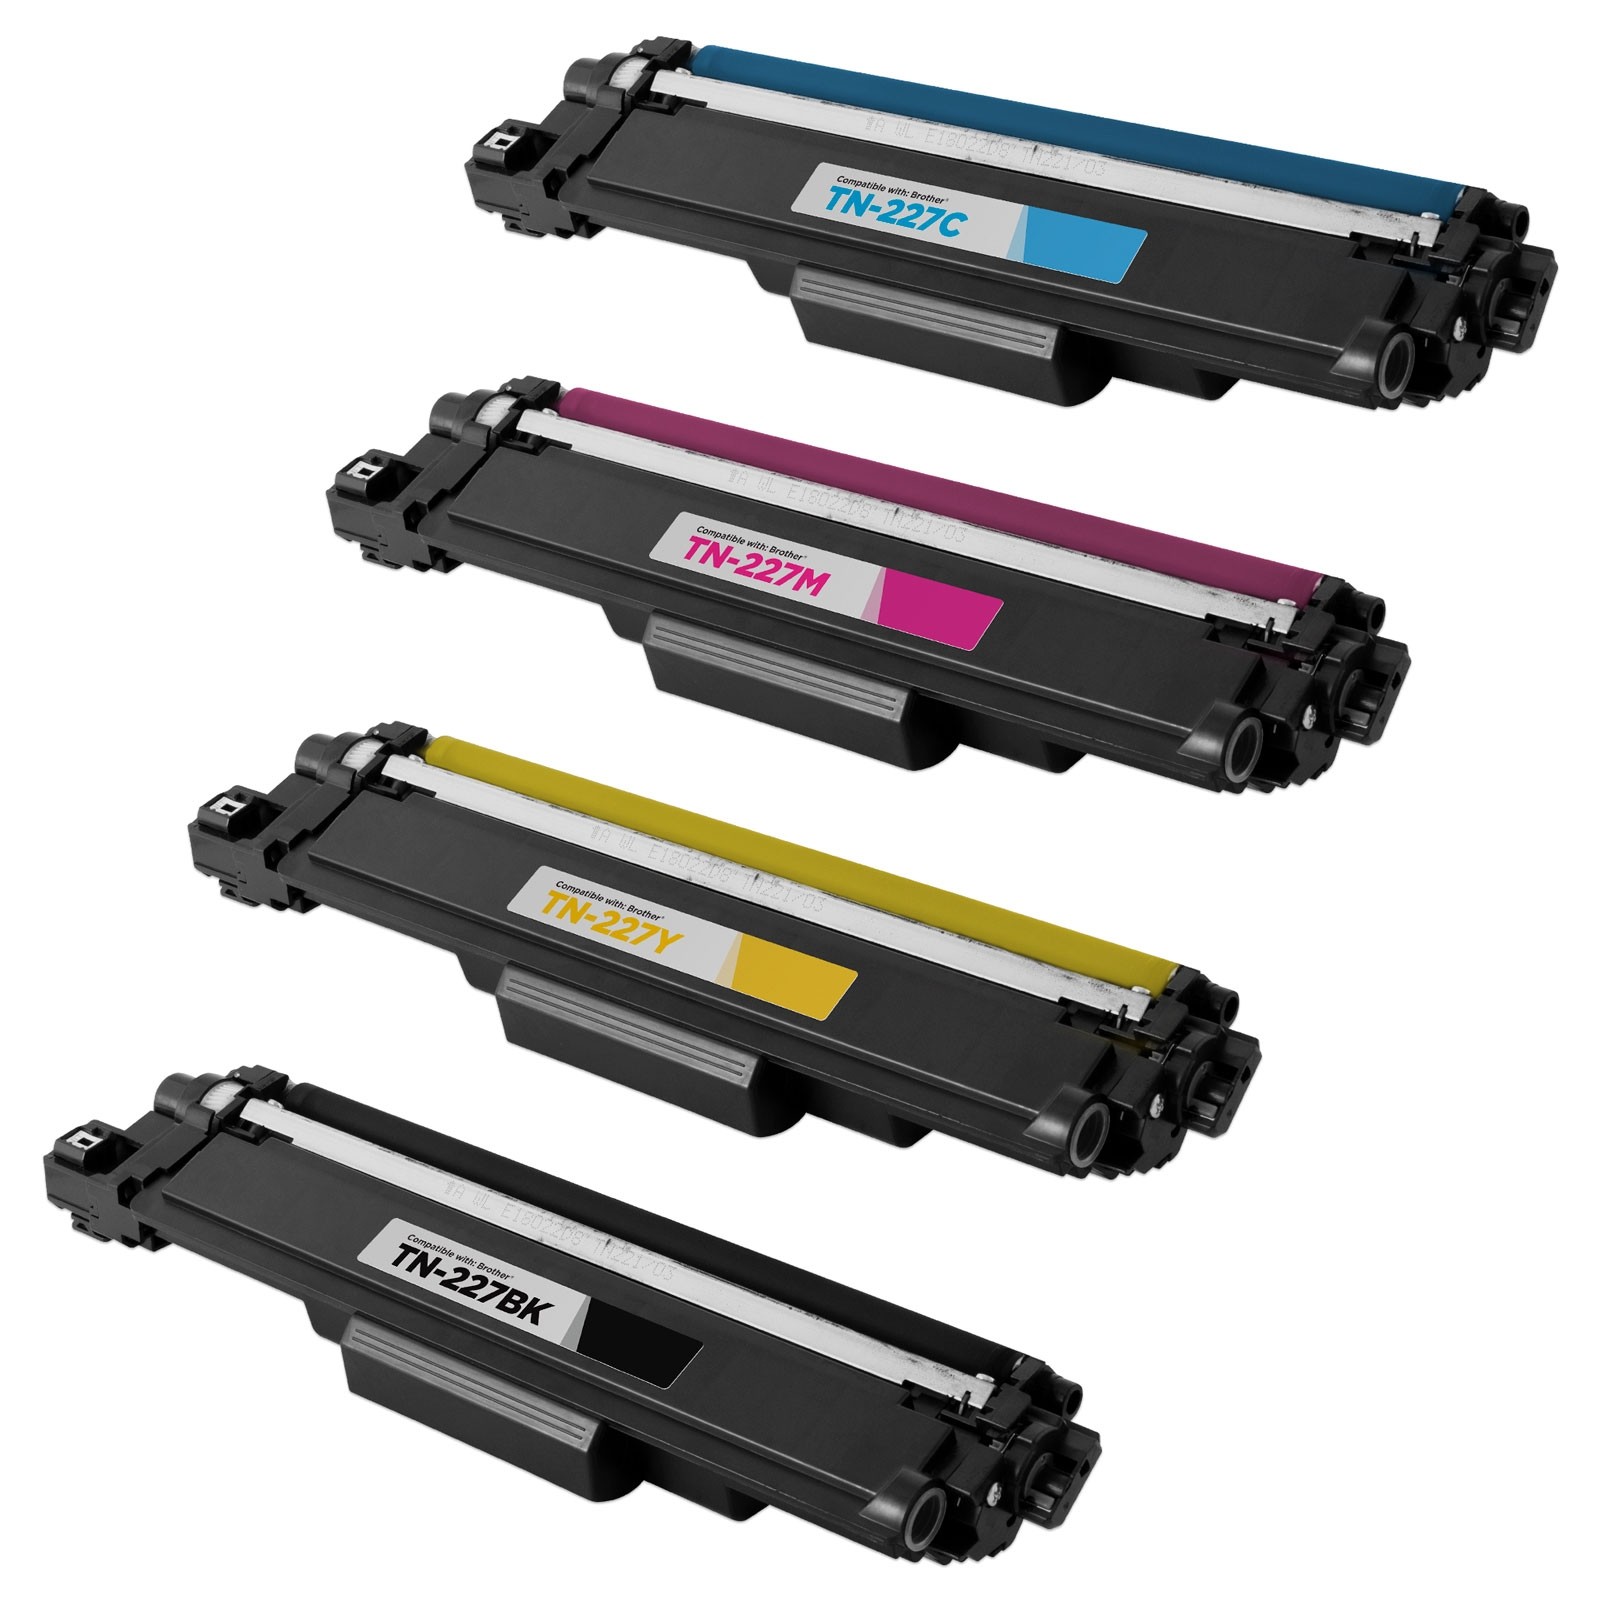 Brother MFC-L3710CW toner cartridges - buy ink refills for Brother MFC- L3710CW in Canada